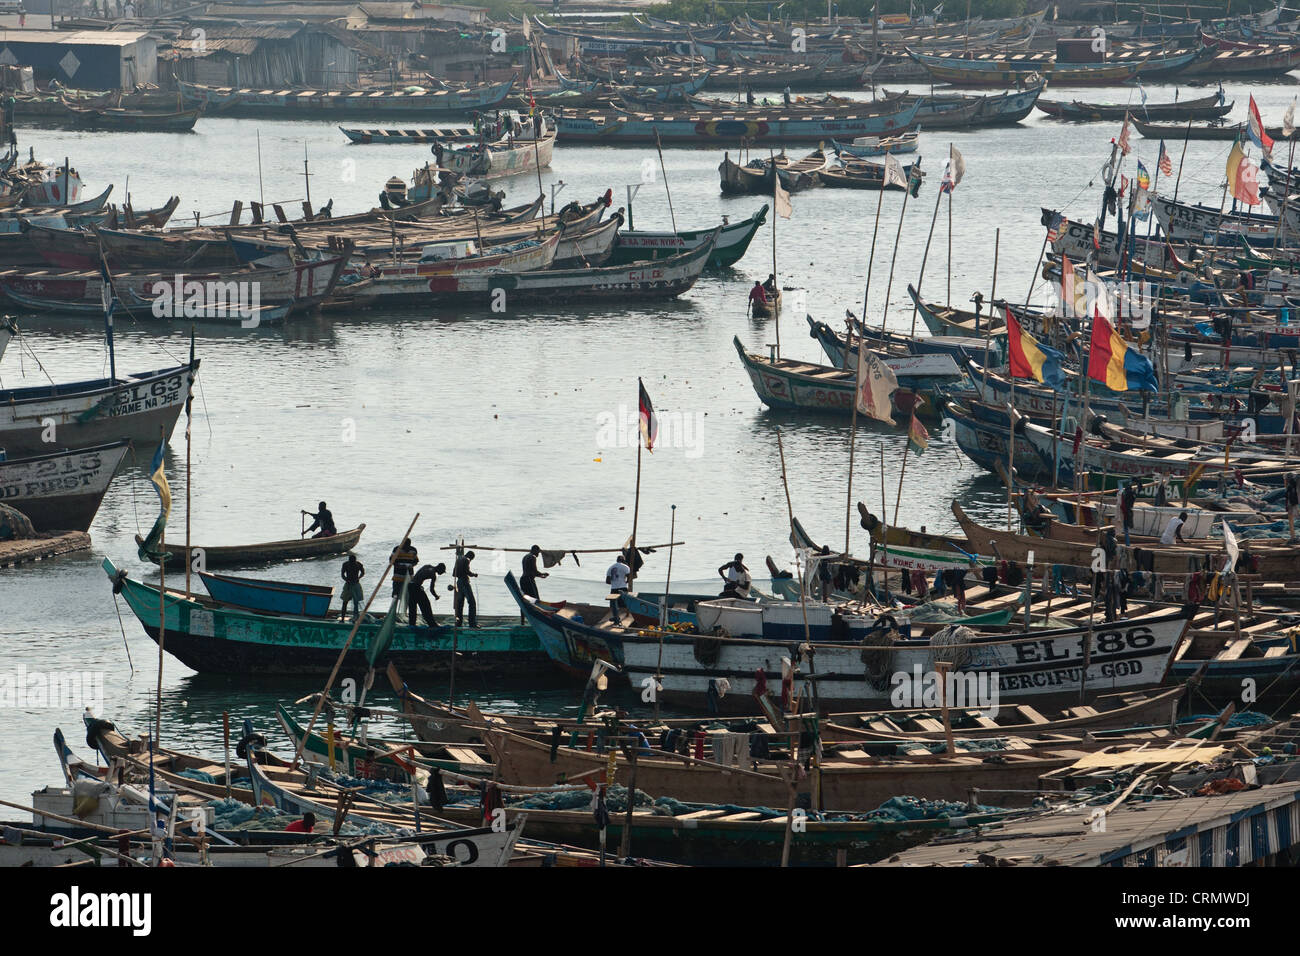 Fishing boats in the harbor of Elmina, about 130km west of Ghana's capital Accra on Thursday April 9, 2009. Stock Photo